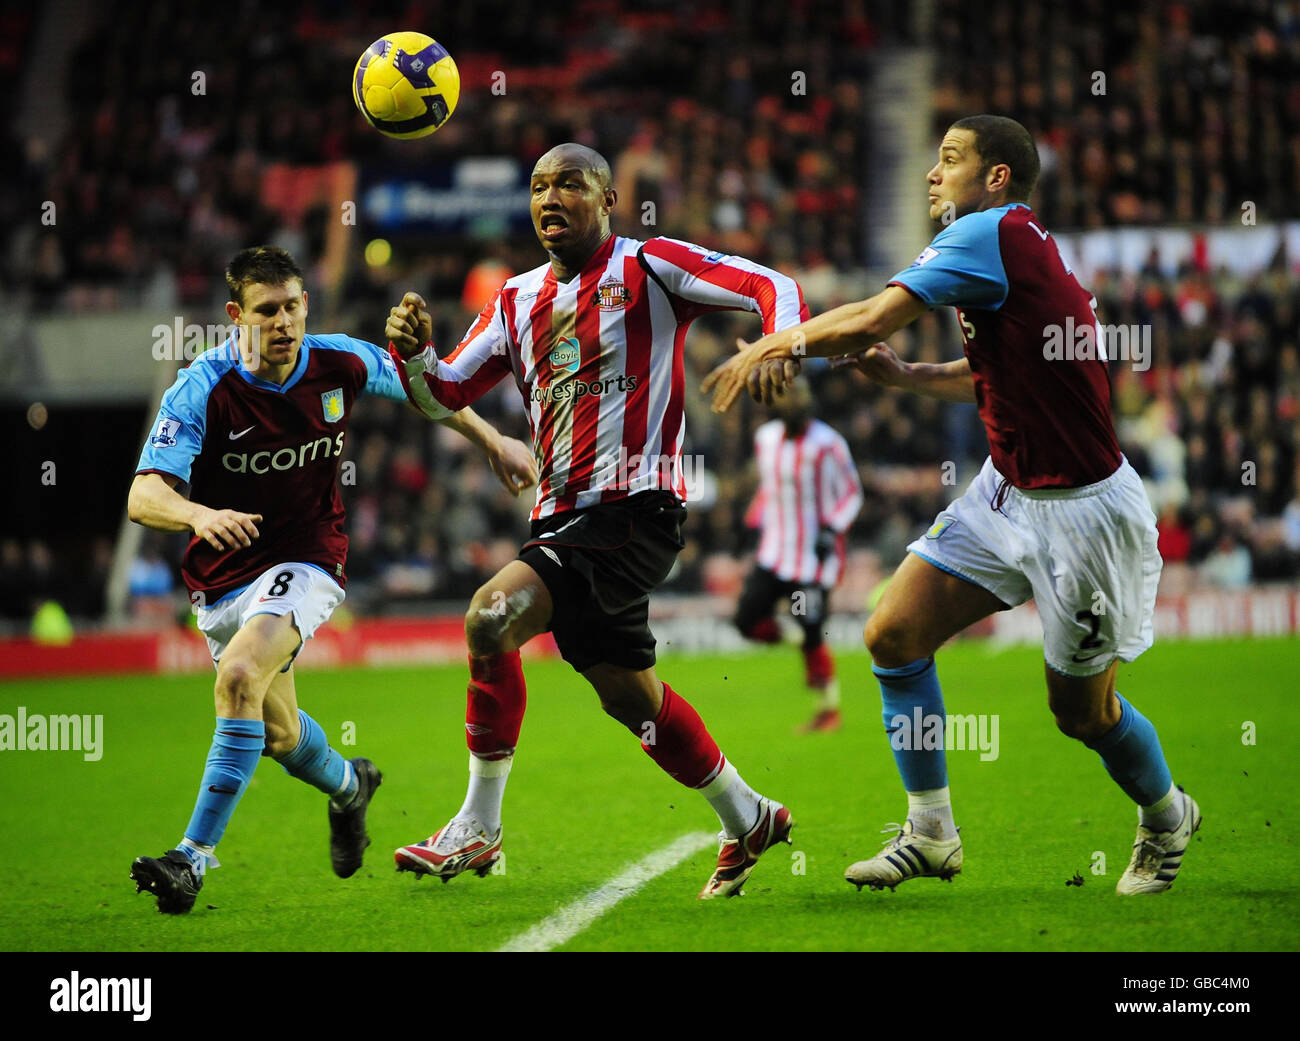 Sunderland's El-Hadji Douf and Aston Villa's James Milner (left) and Luke Young during the Barclays Premier League match at the Stadium of Light, Sunderland. Stock Photo